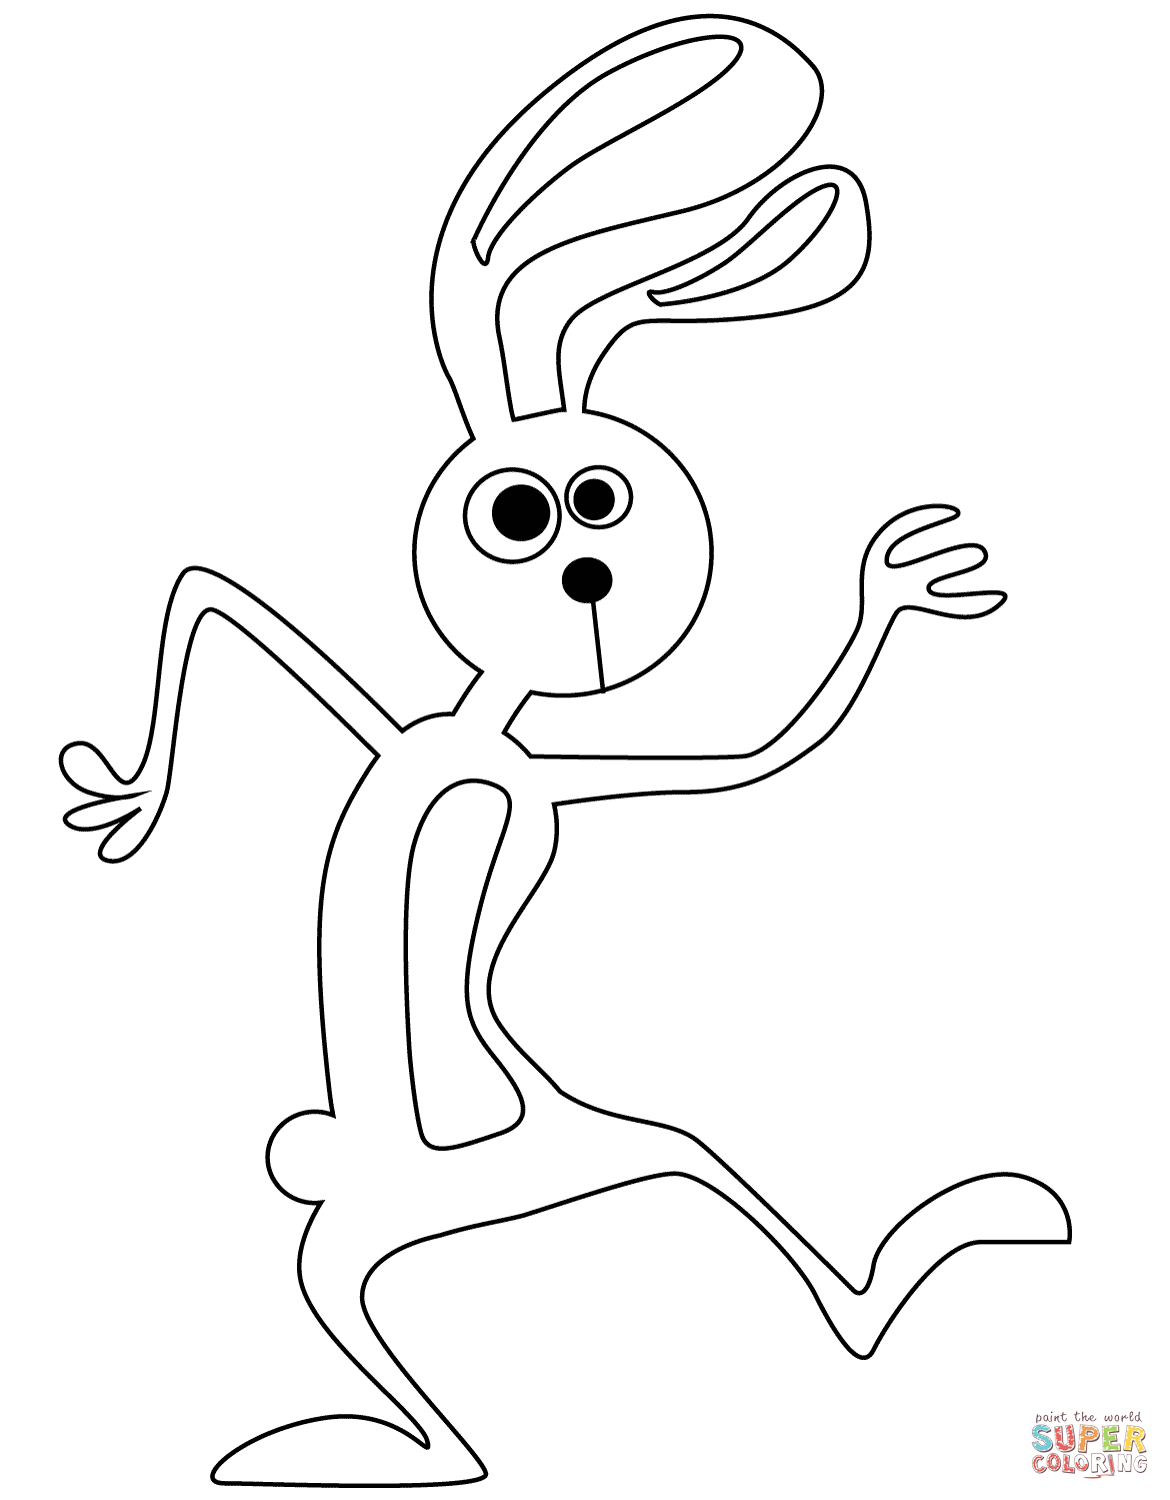 Cute Bunny coloring page | Free Printable Coloring Pages